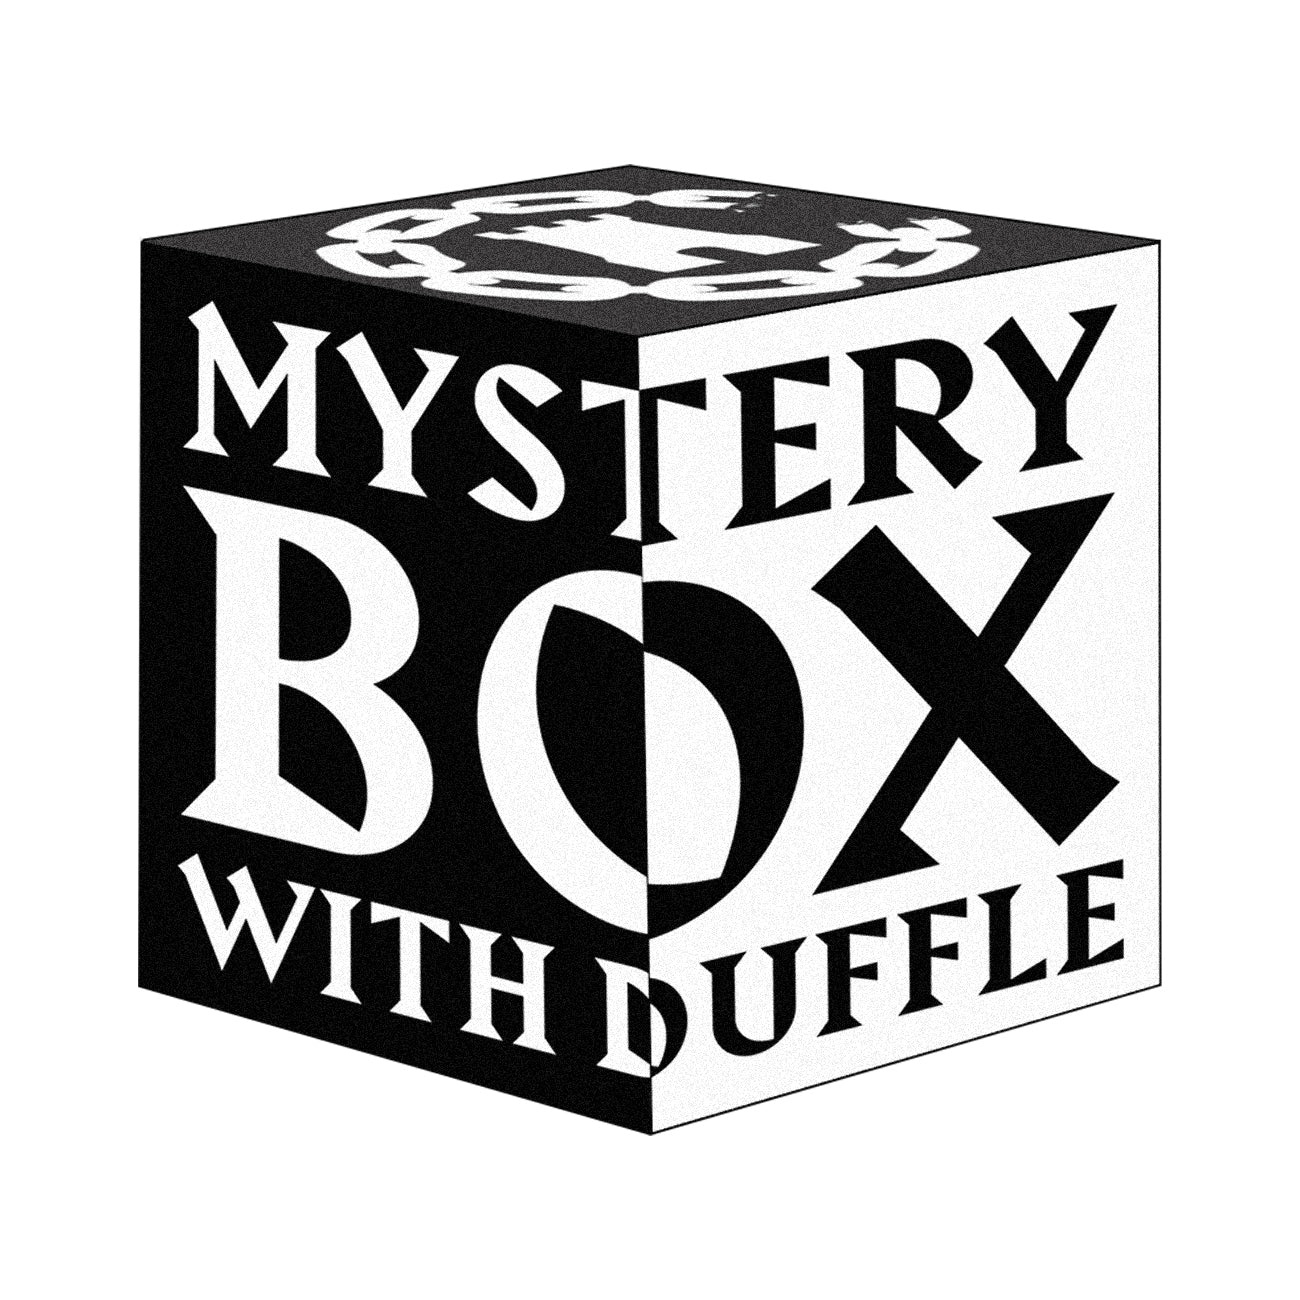 What's inside an  Mystery Box 